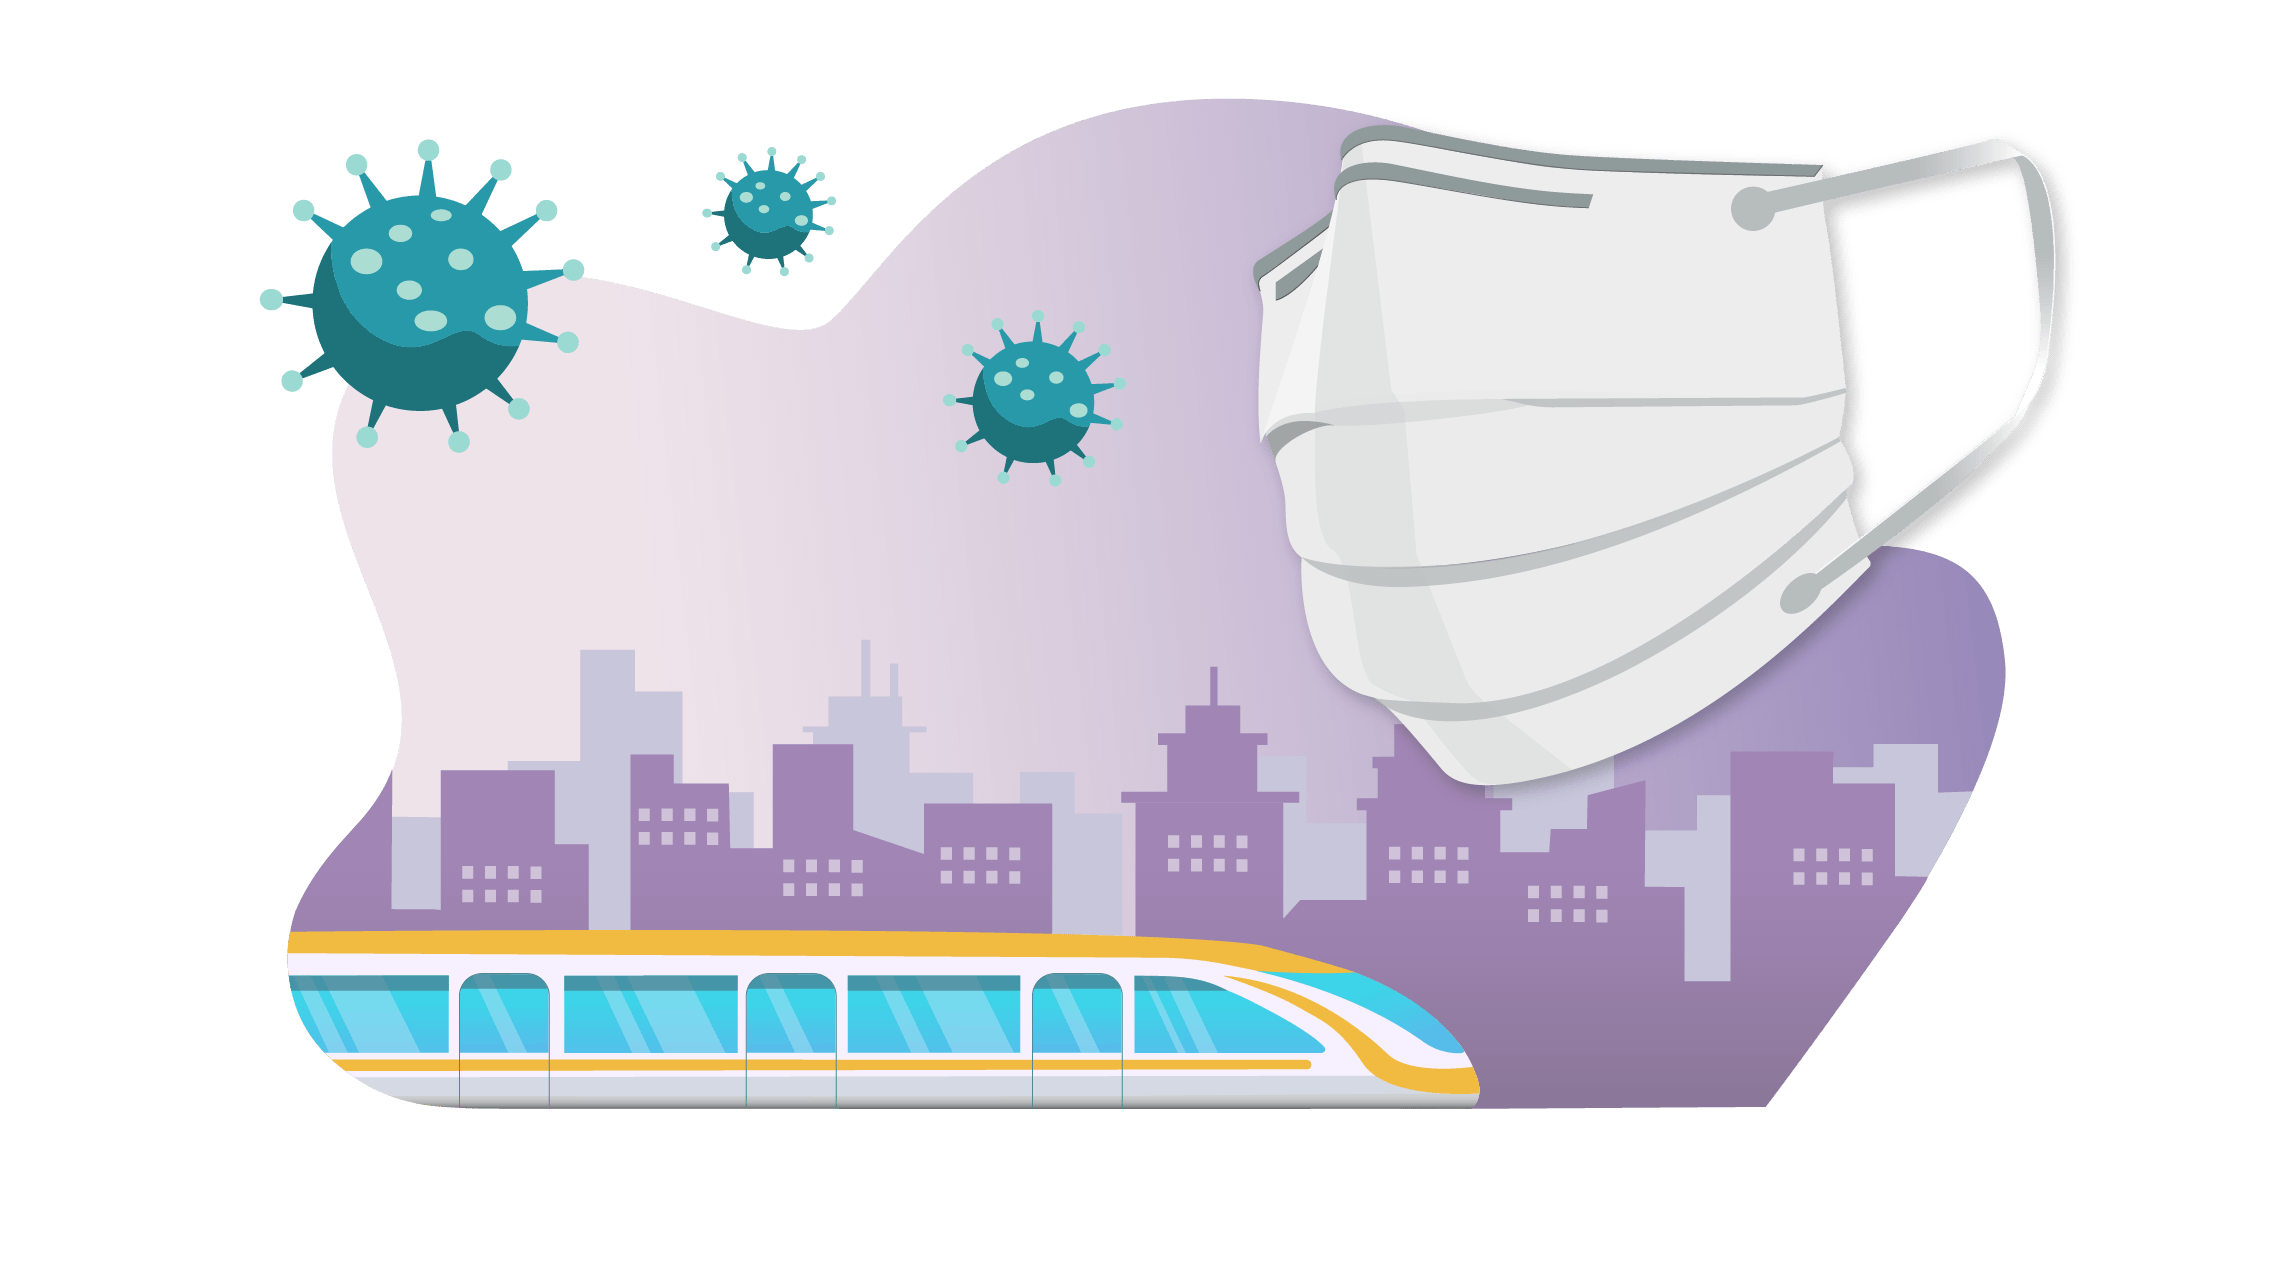 Illustration of a train with city on the background, virus c19 floating in the air and a mask on the side.